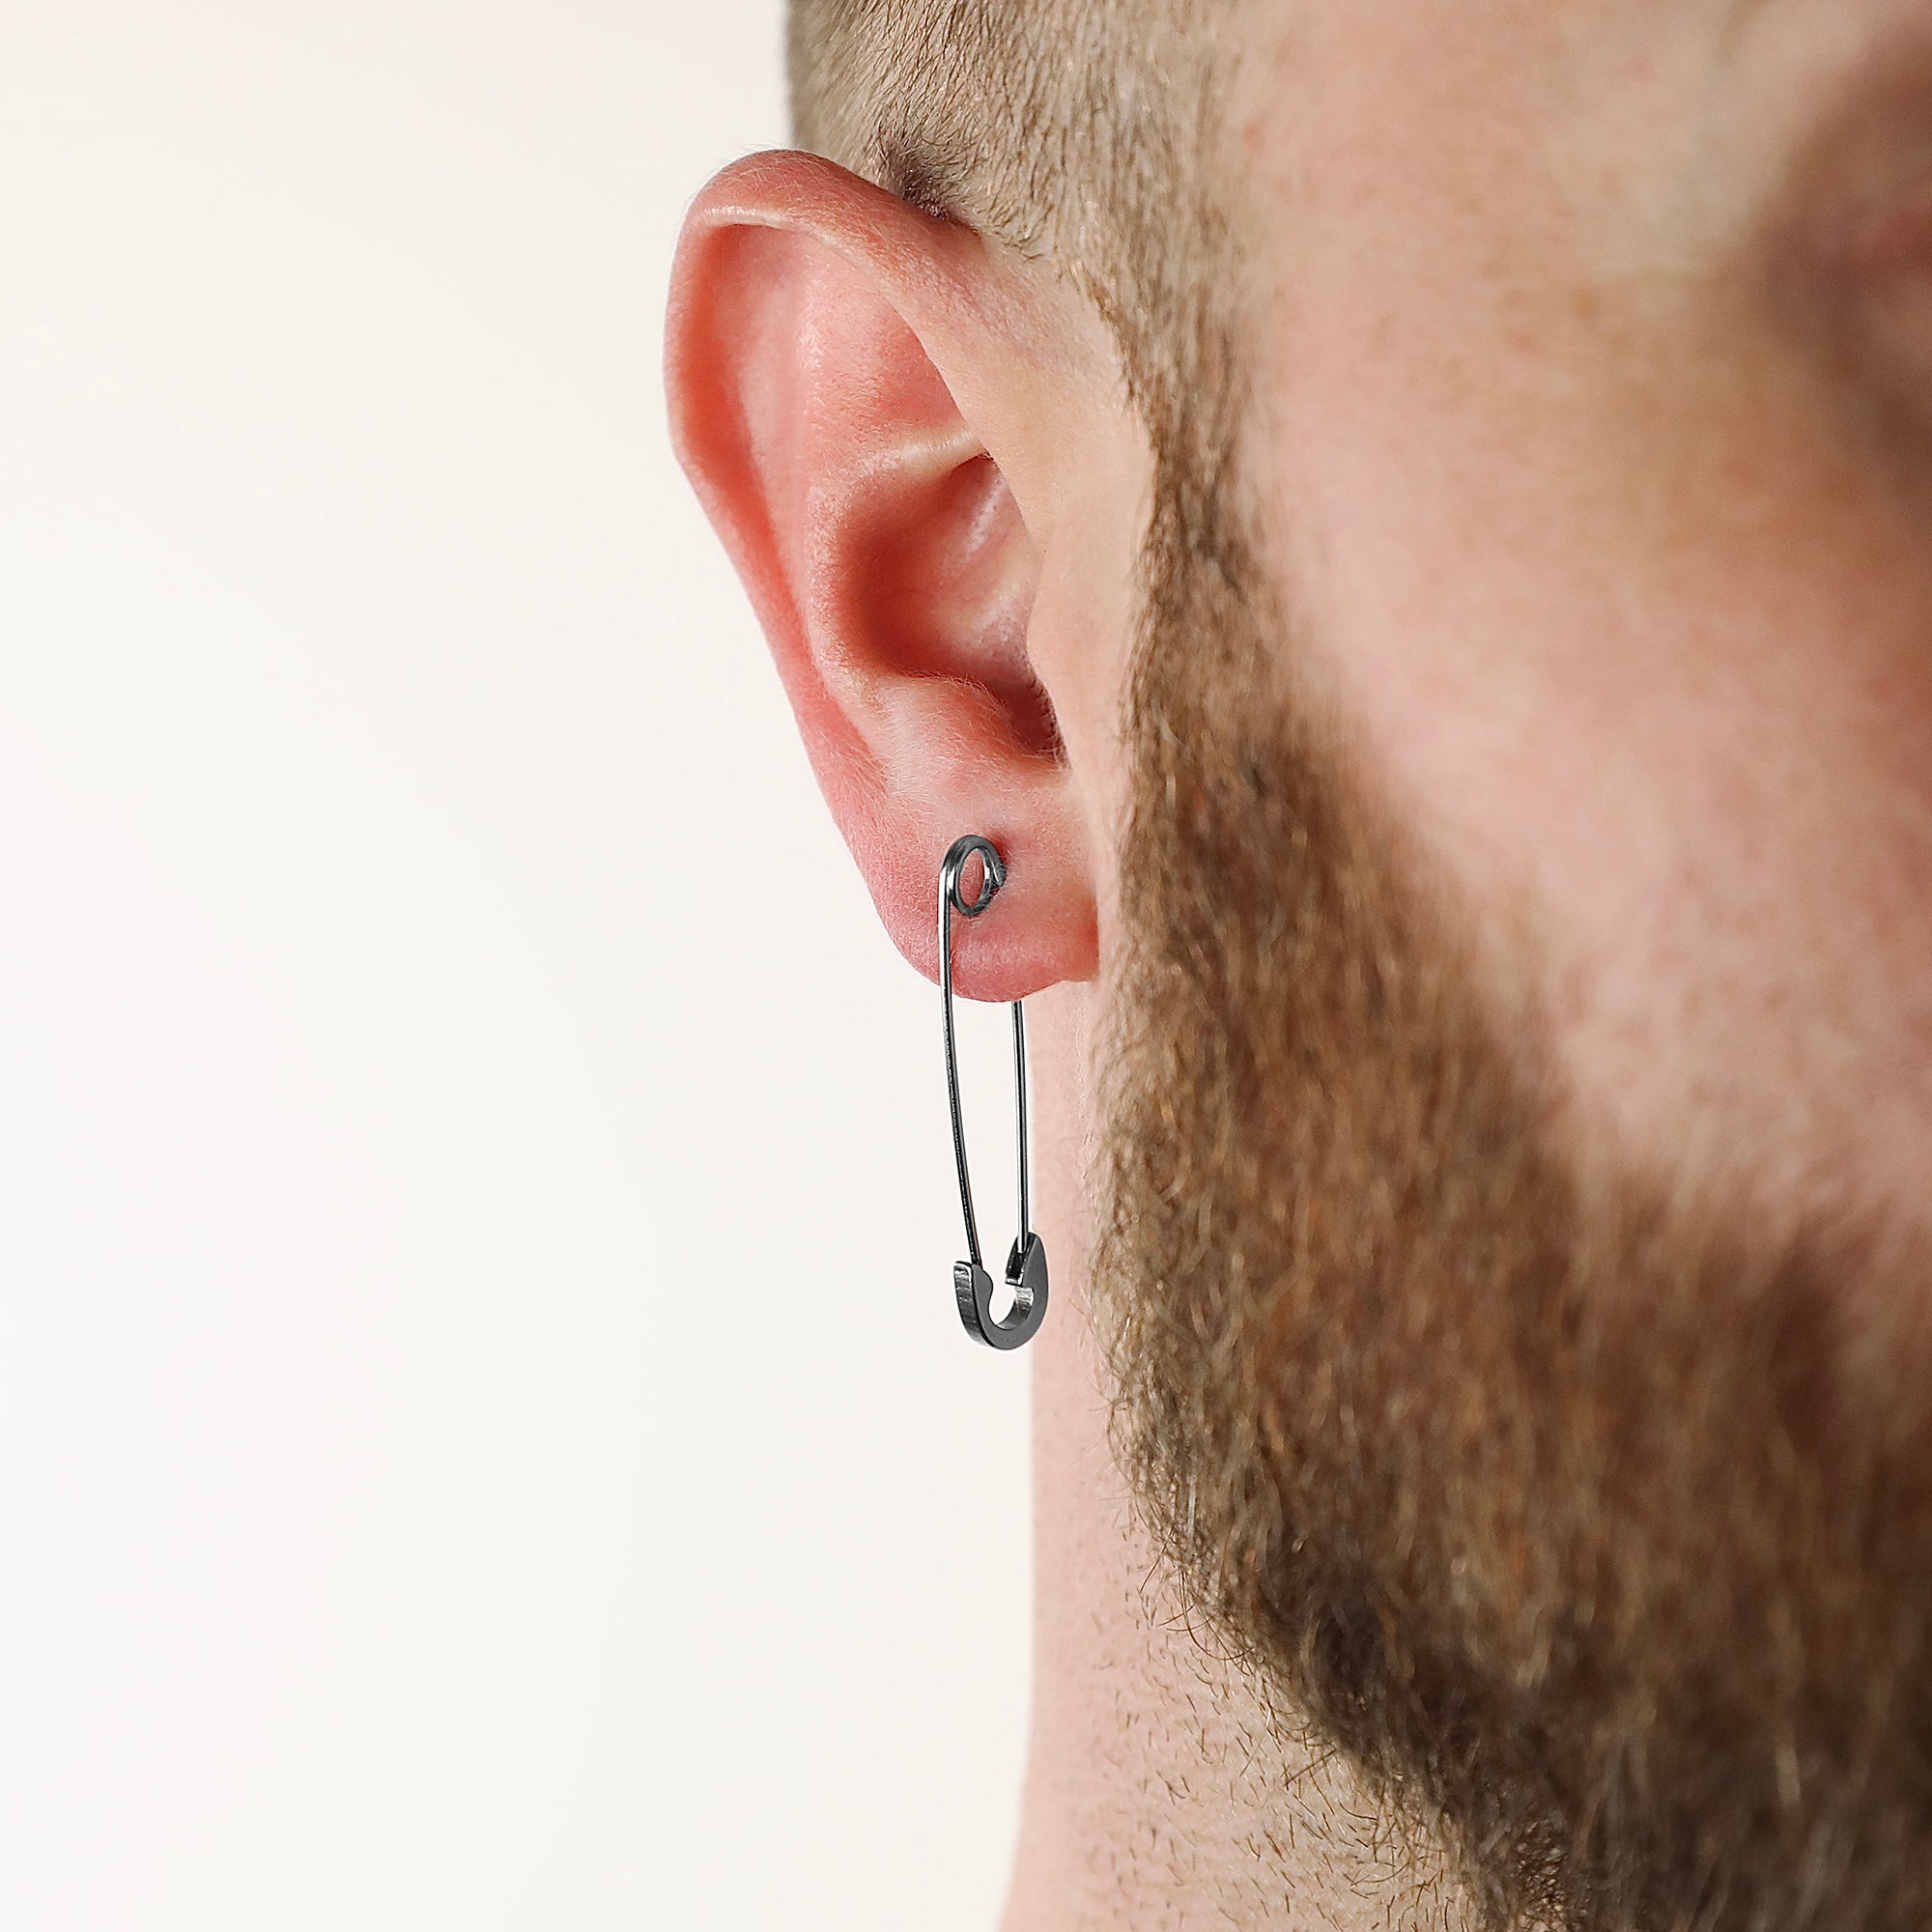 Weekday safety pin earrings in silver | ASOS